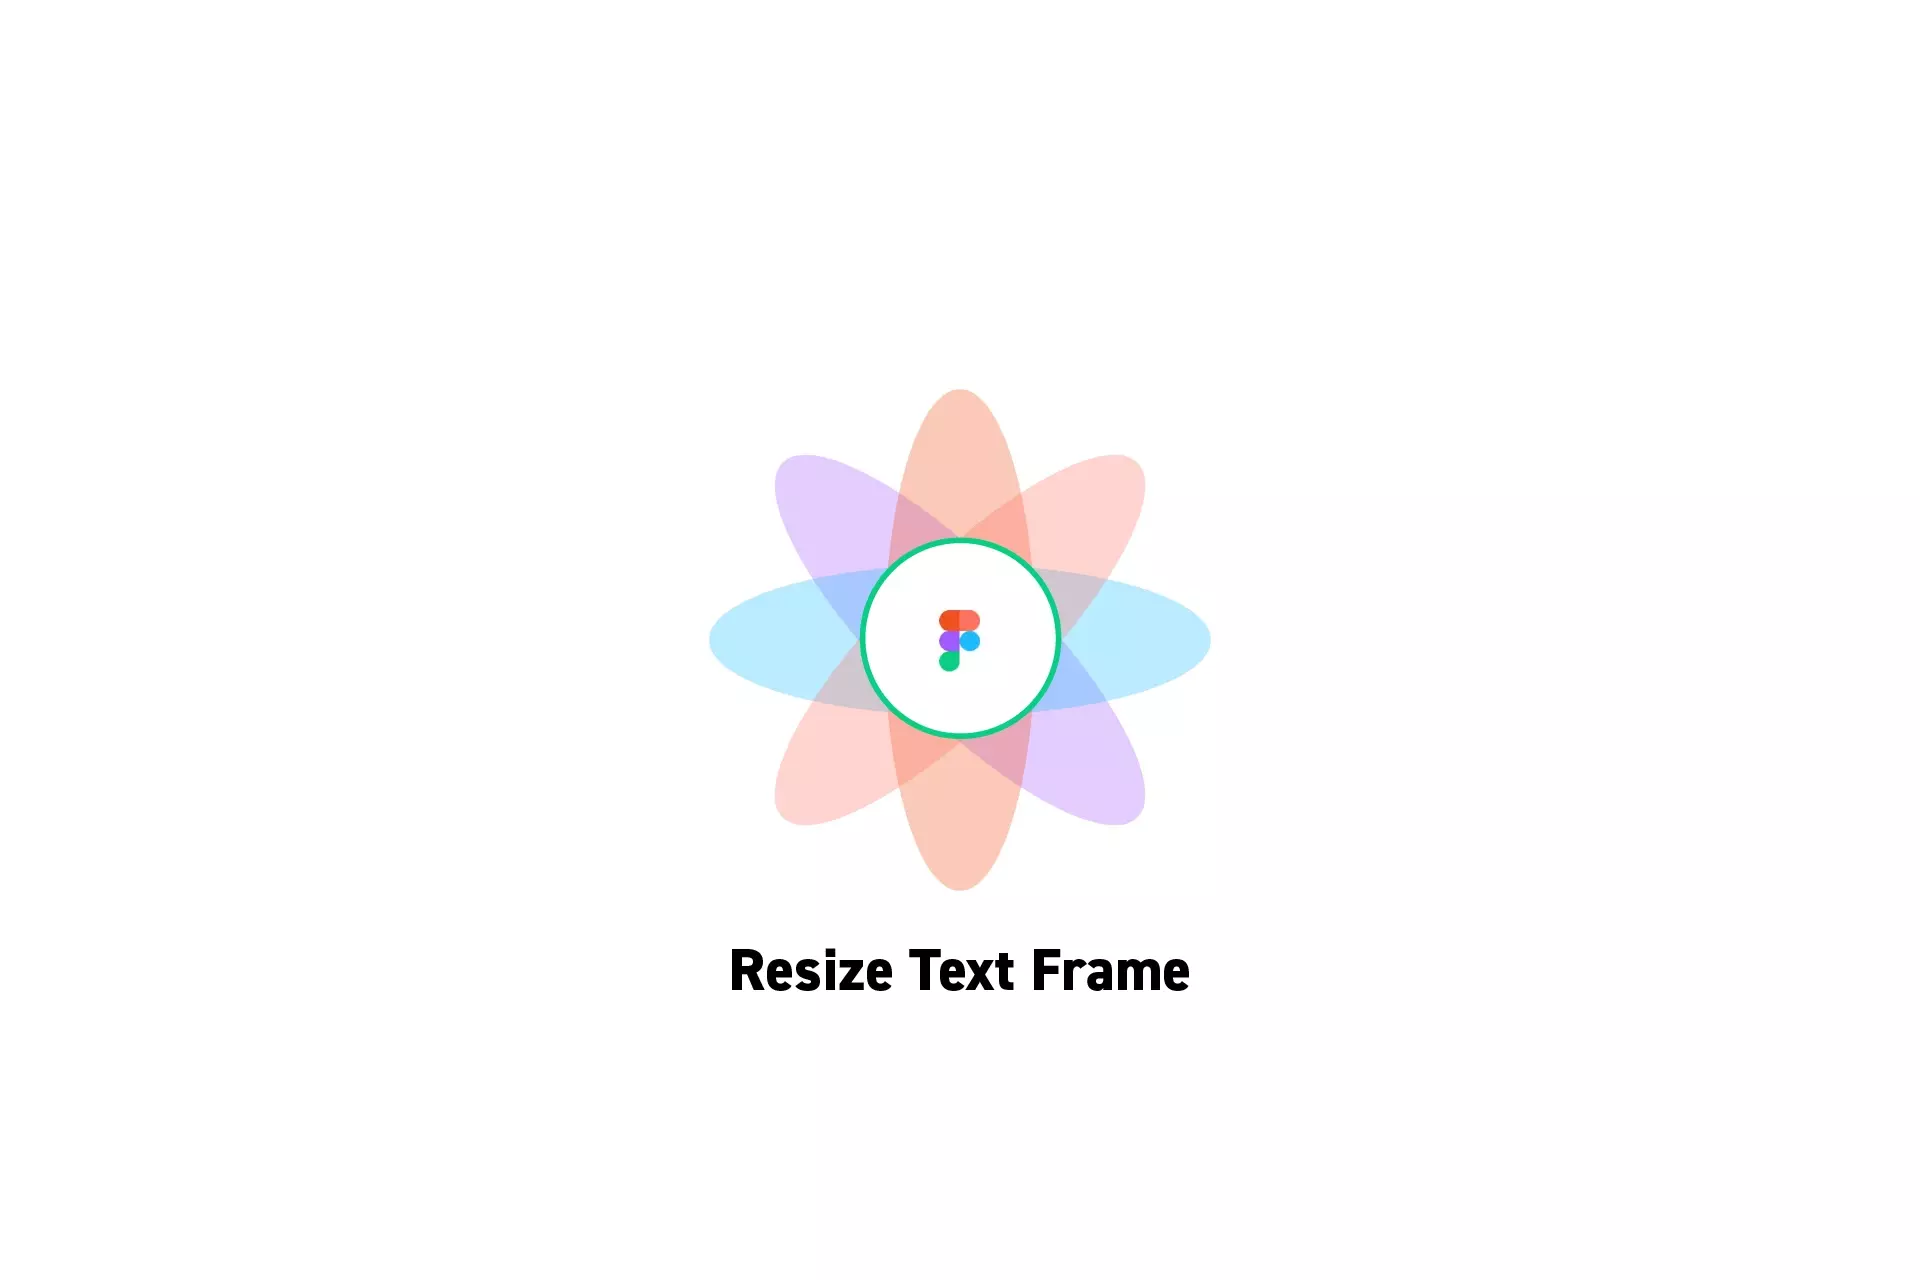 A flower that represents Figma with the text “Resize Text Frame” beneath it.